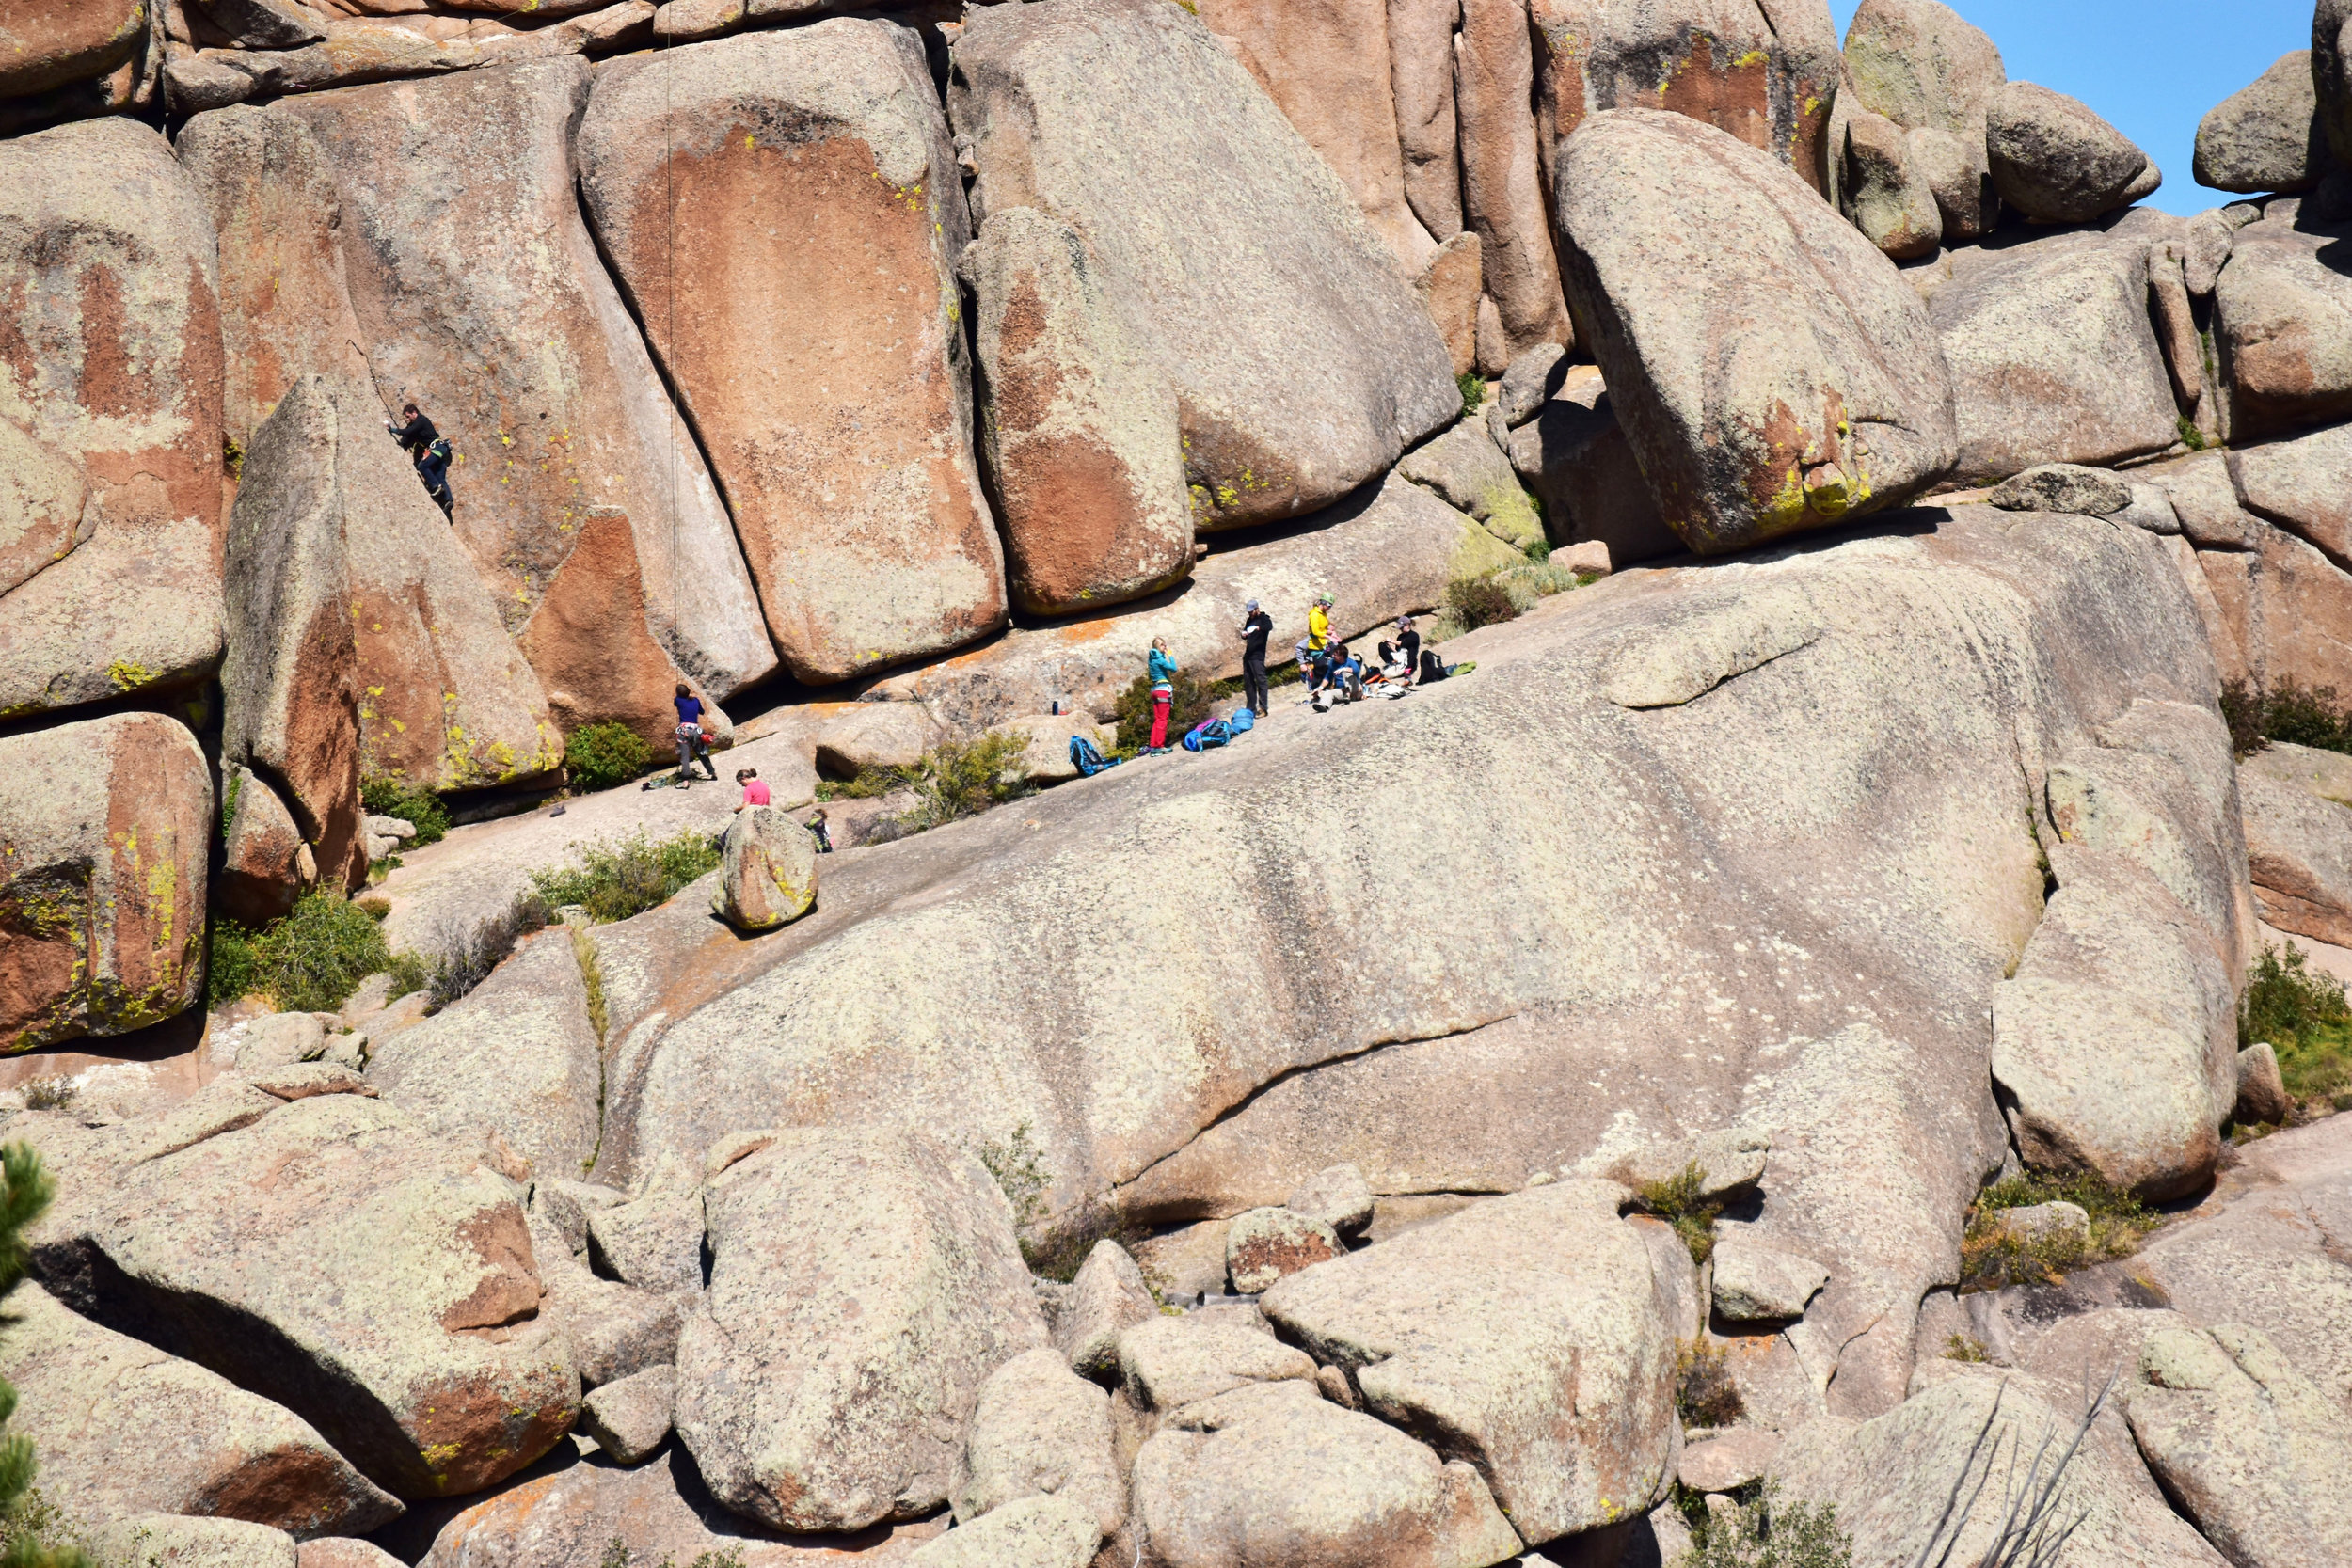  Vedauwoo is known for the challenging rocks - a climbers dream!  